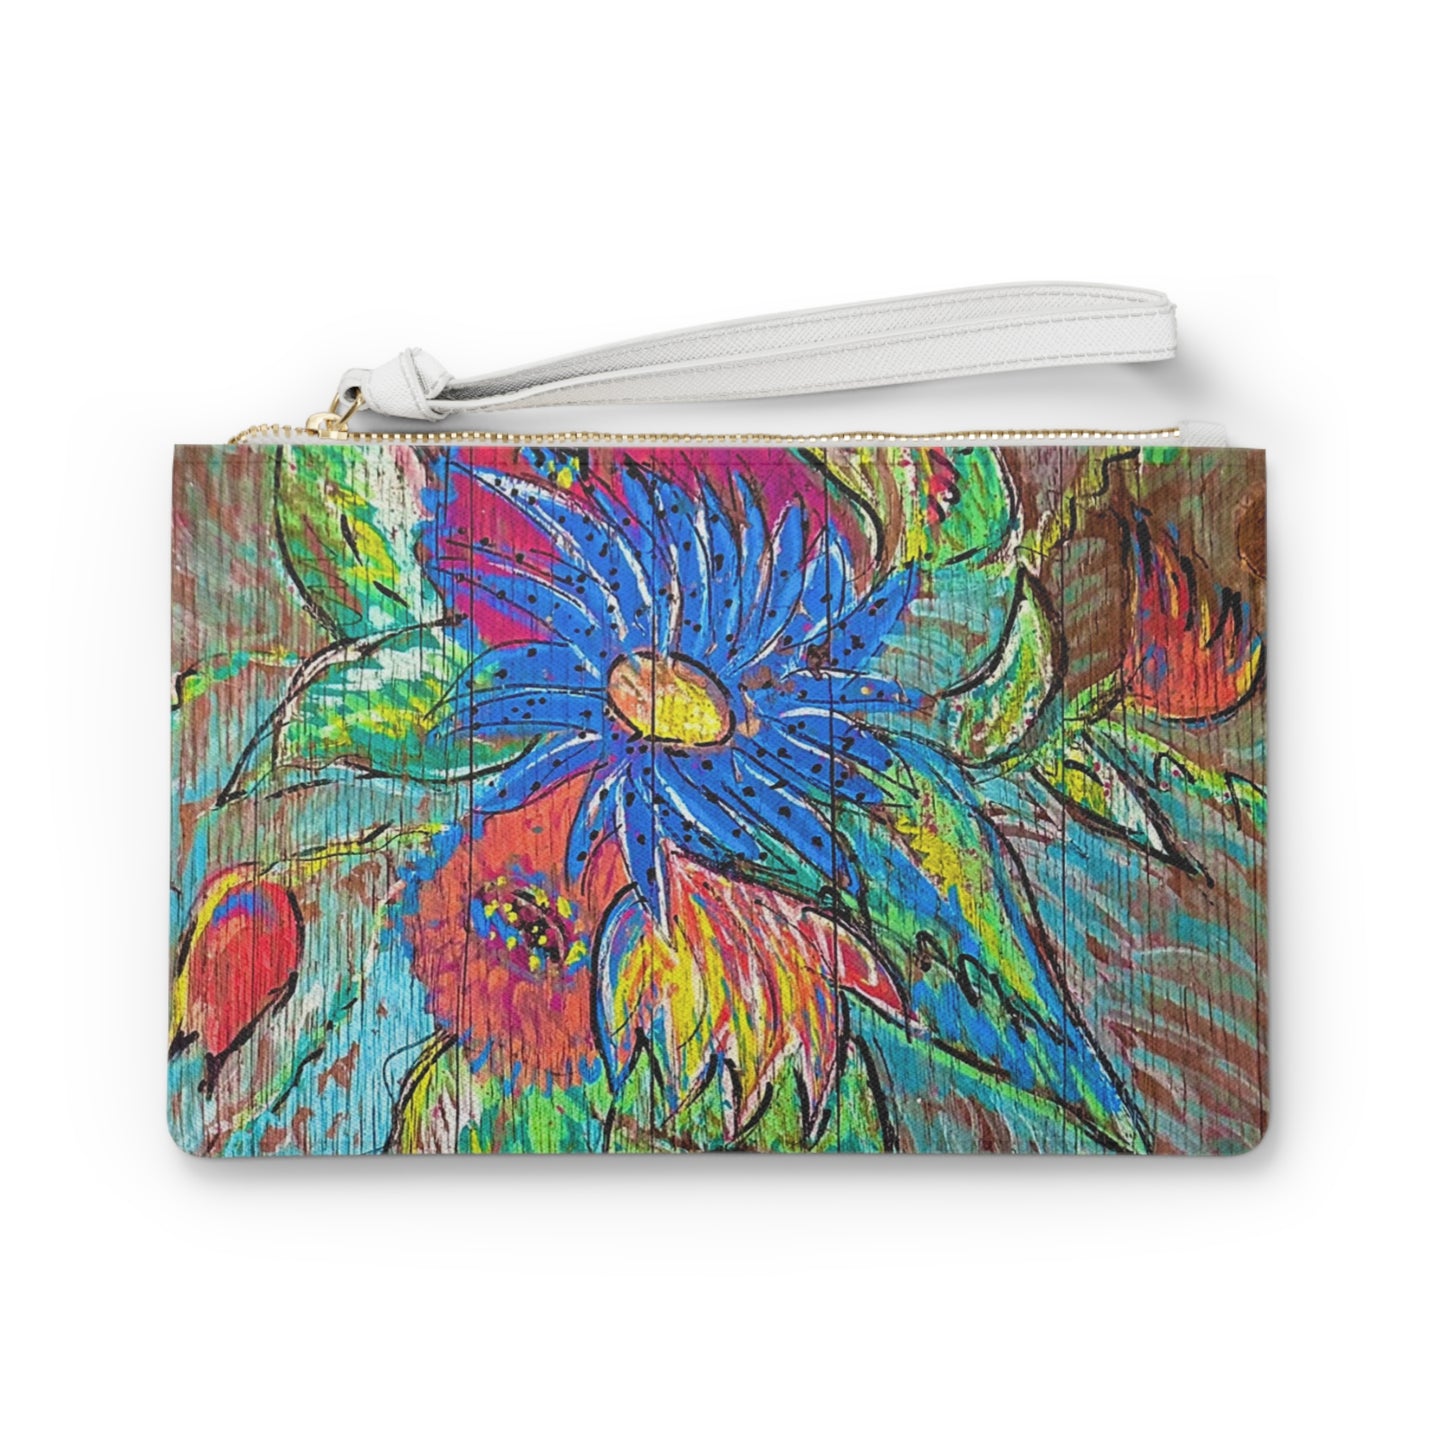 Rustic Wood Floral Painting Makeup Errand Evening Pouch Clutch Bag